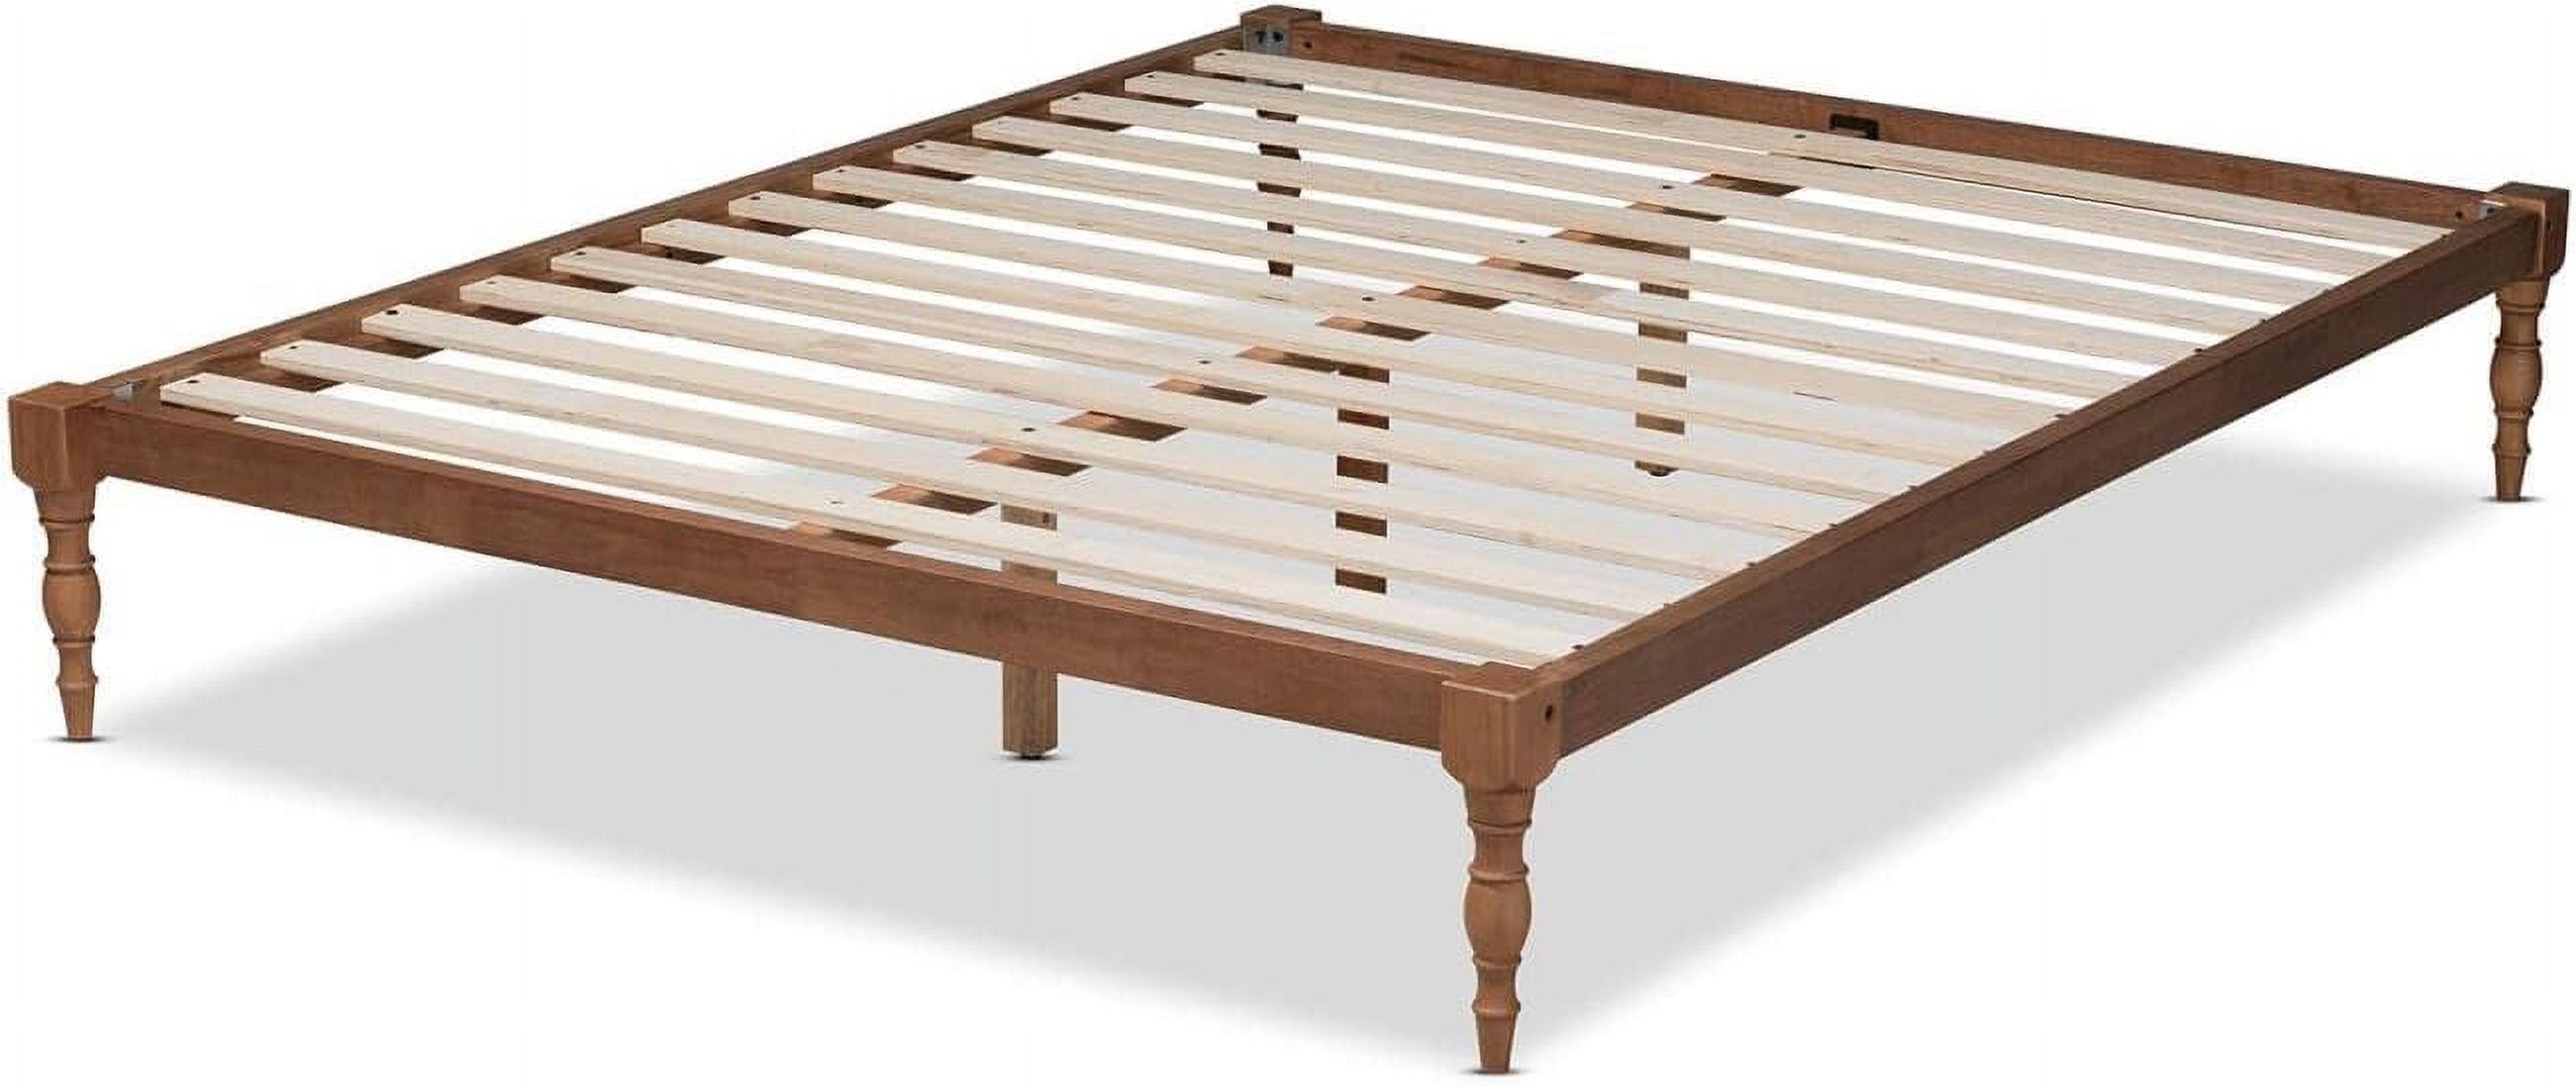 Walnut Brown Full/Double Wood Frame Platform Bed with Headboard